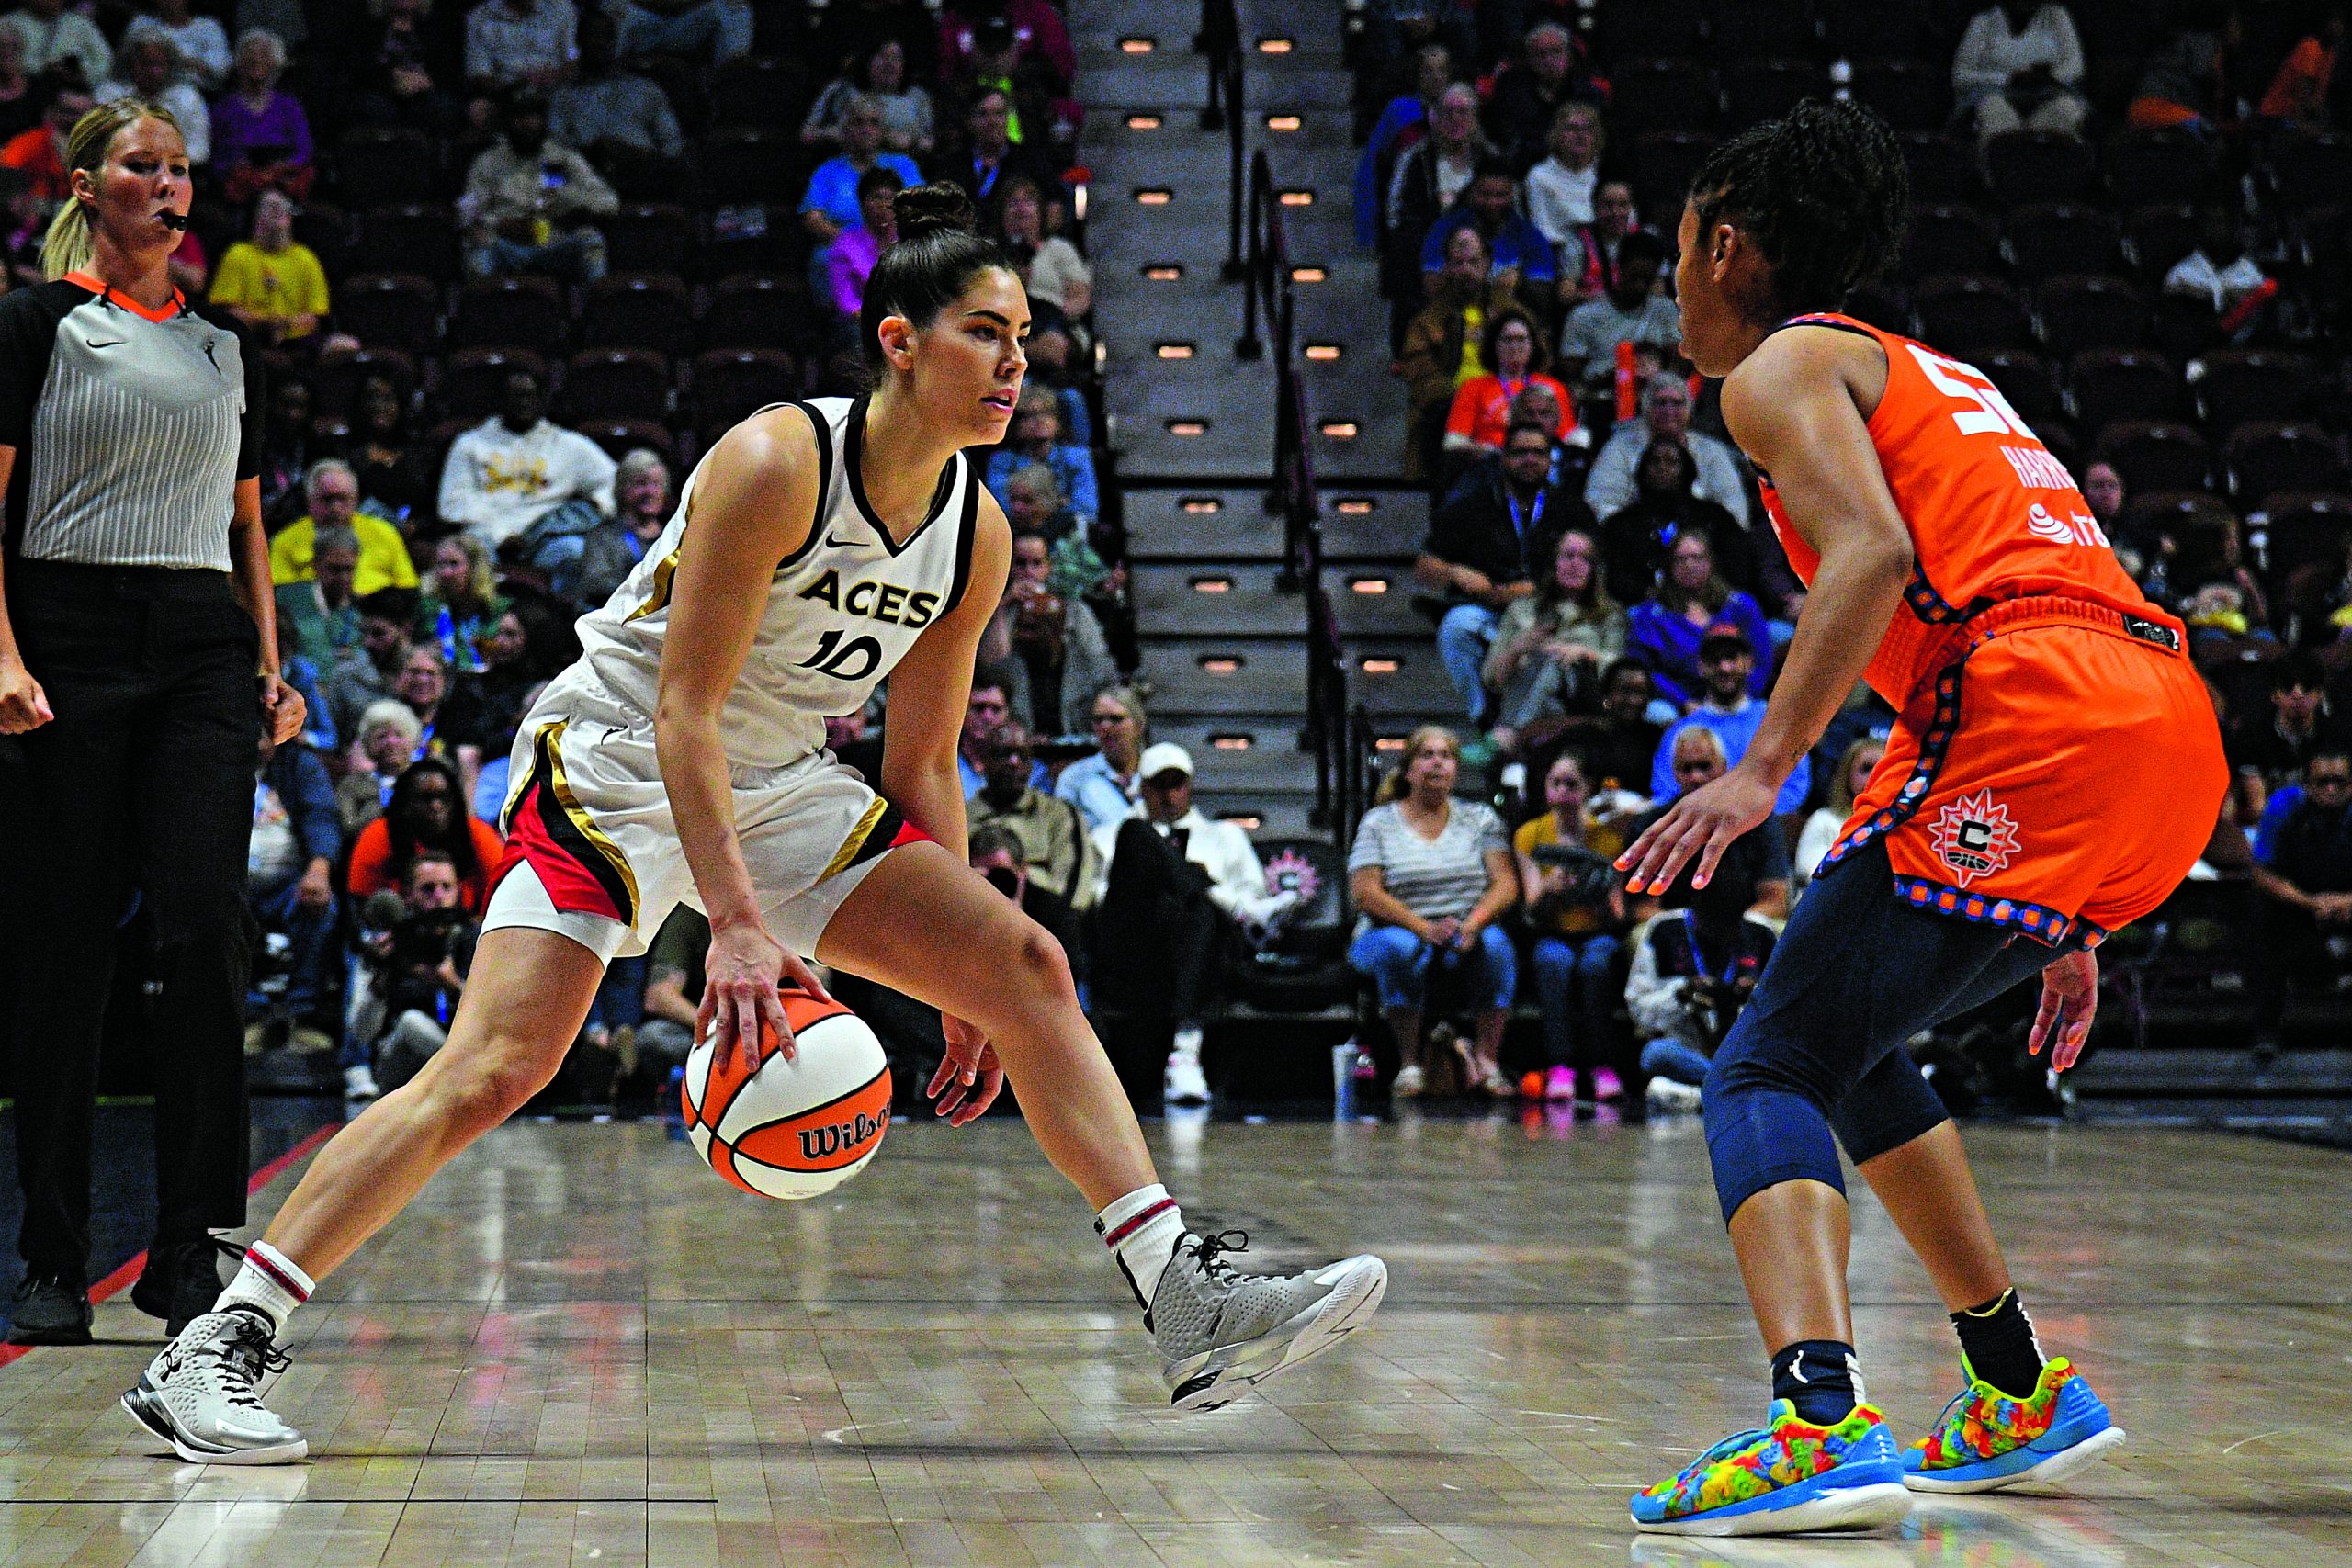 Aces Superstars A’ja Wilson, Kelsey Plum, Chelsea Gray and Jackie Young Open Up on How They’ve Built a Powerhouse in Vegas